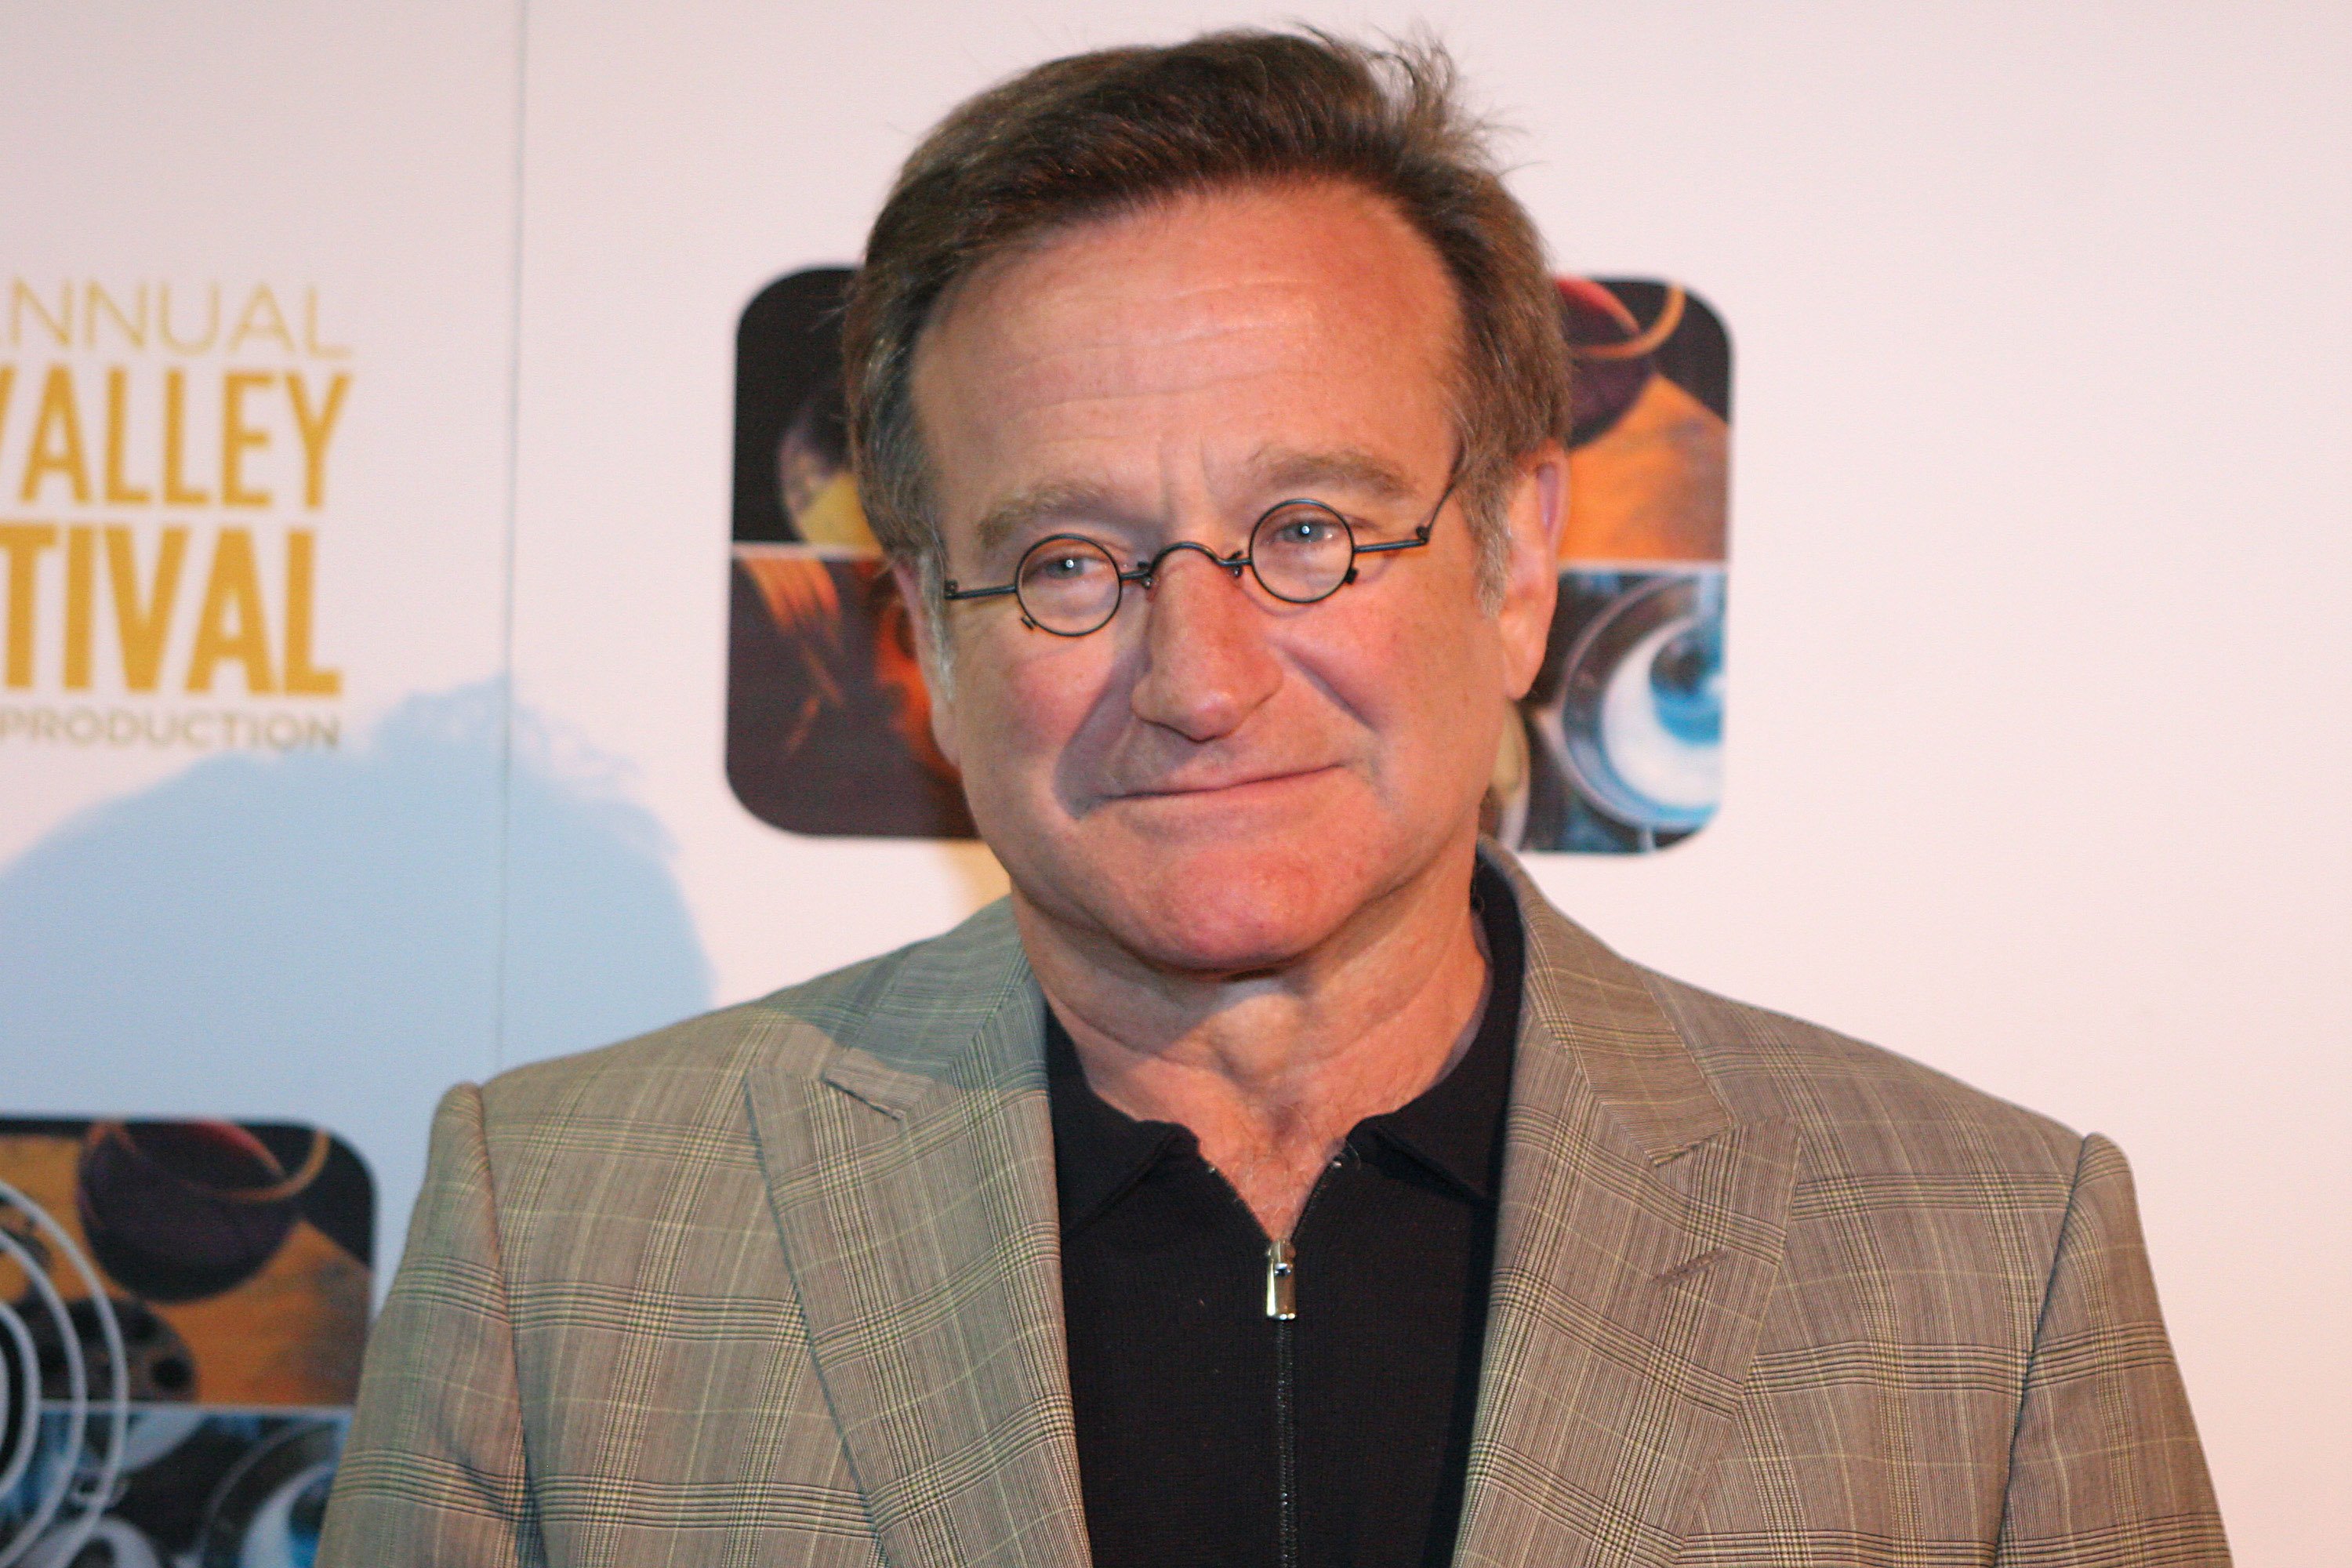 Robin Williams in black shirt and grey jacket from chest-up.